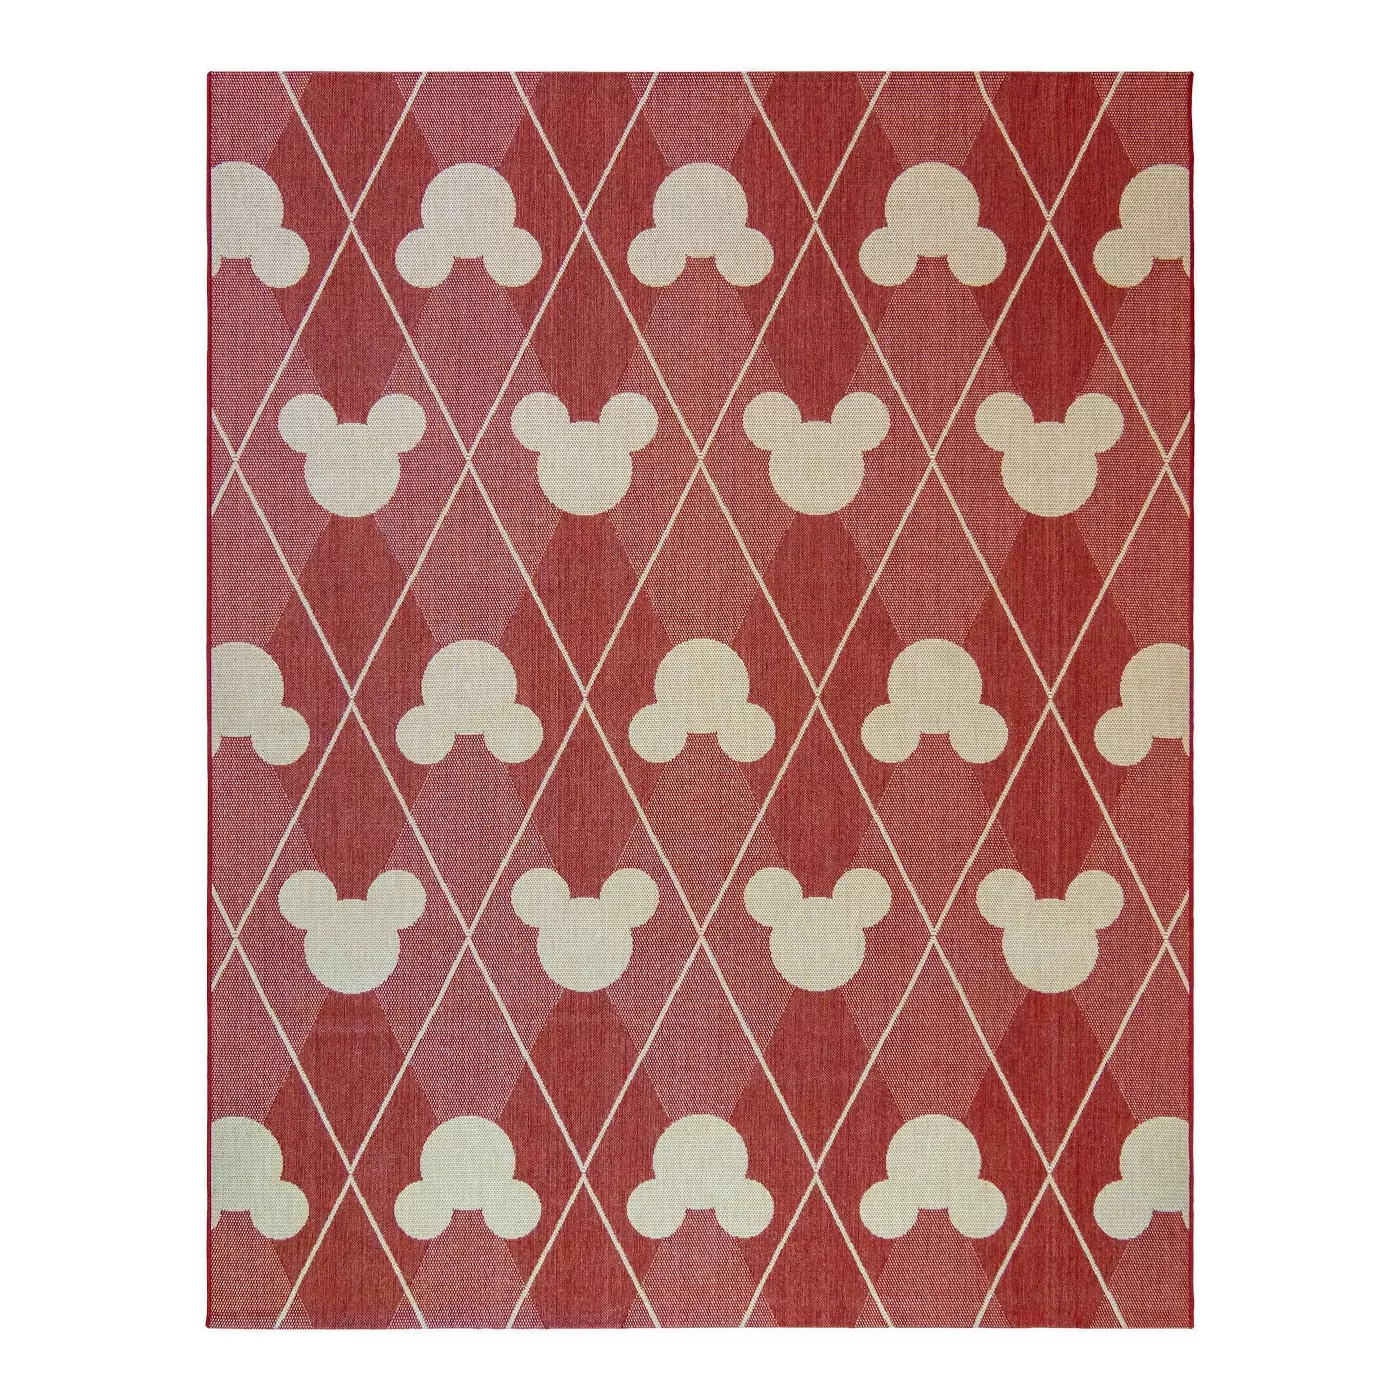 Mickey Mouse and Friends Argyle Outdoor Rug - image 1 of 3